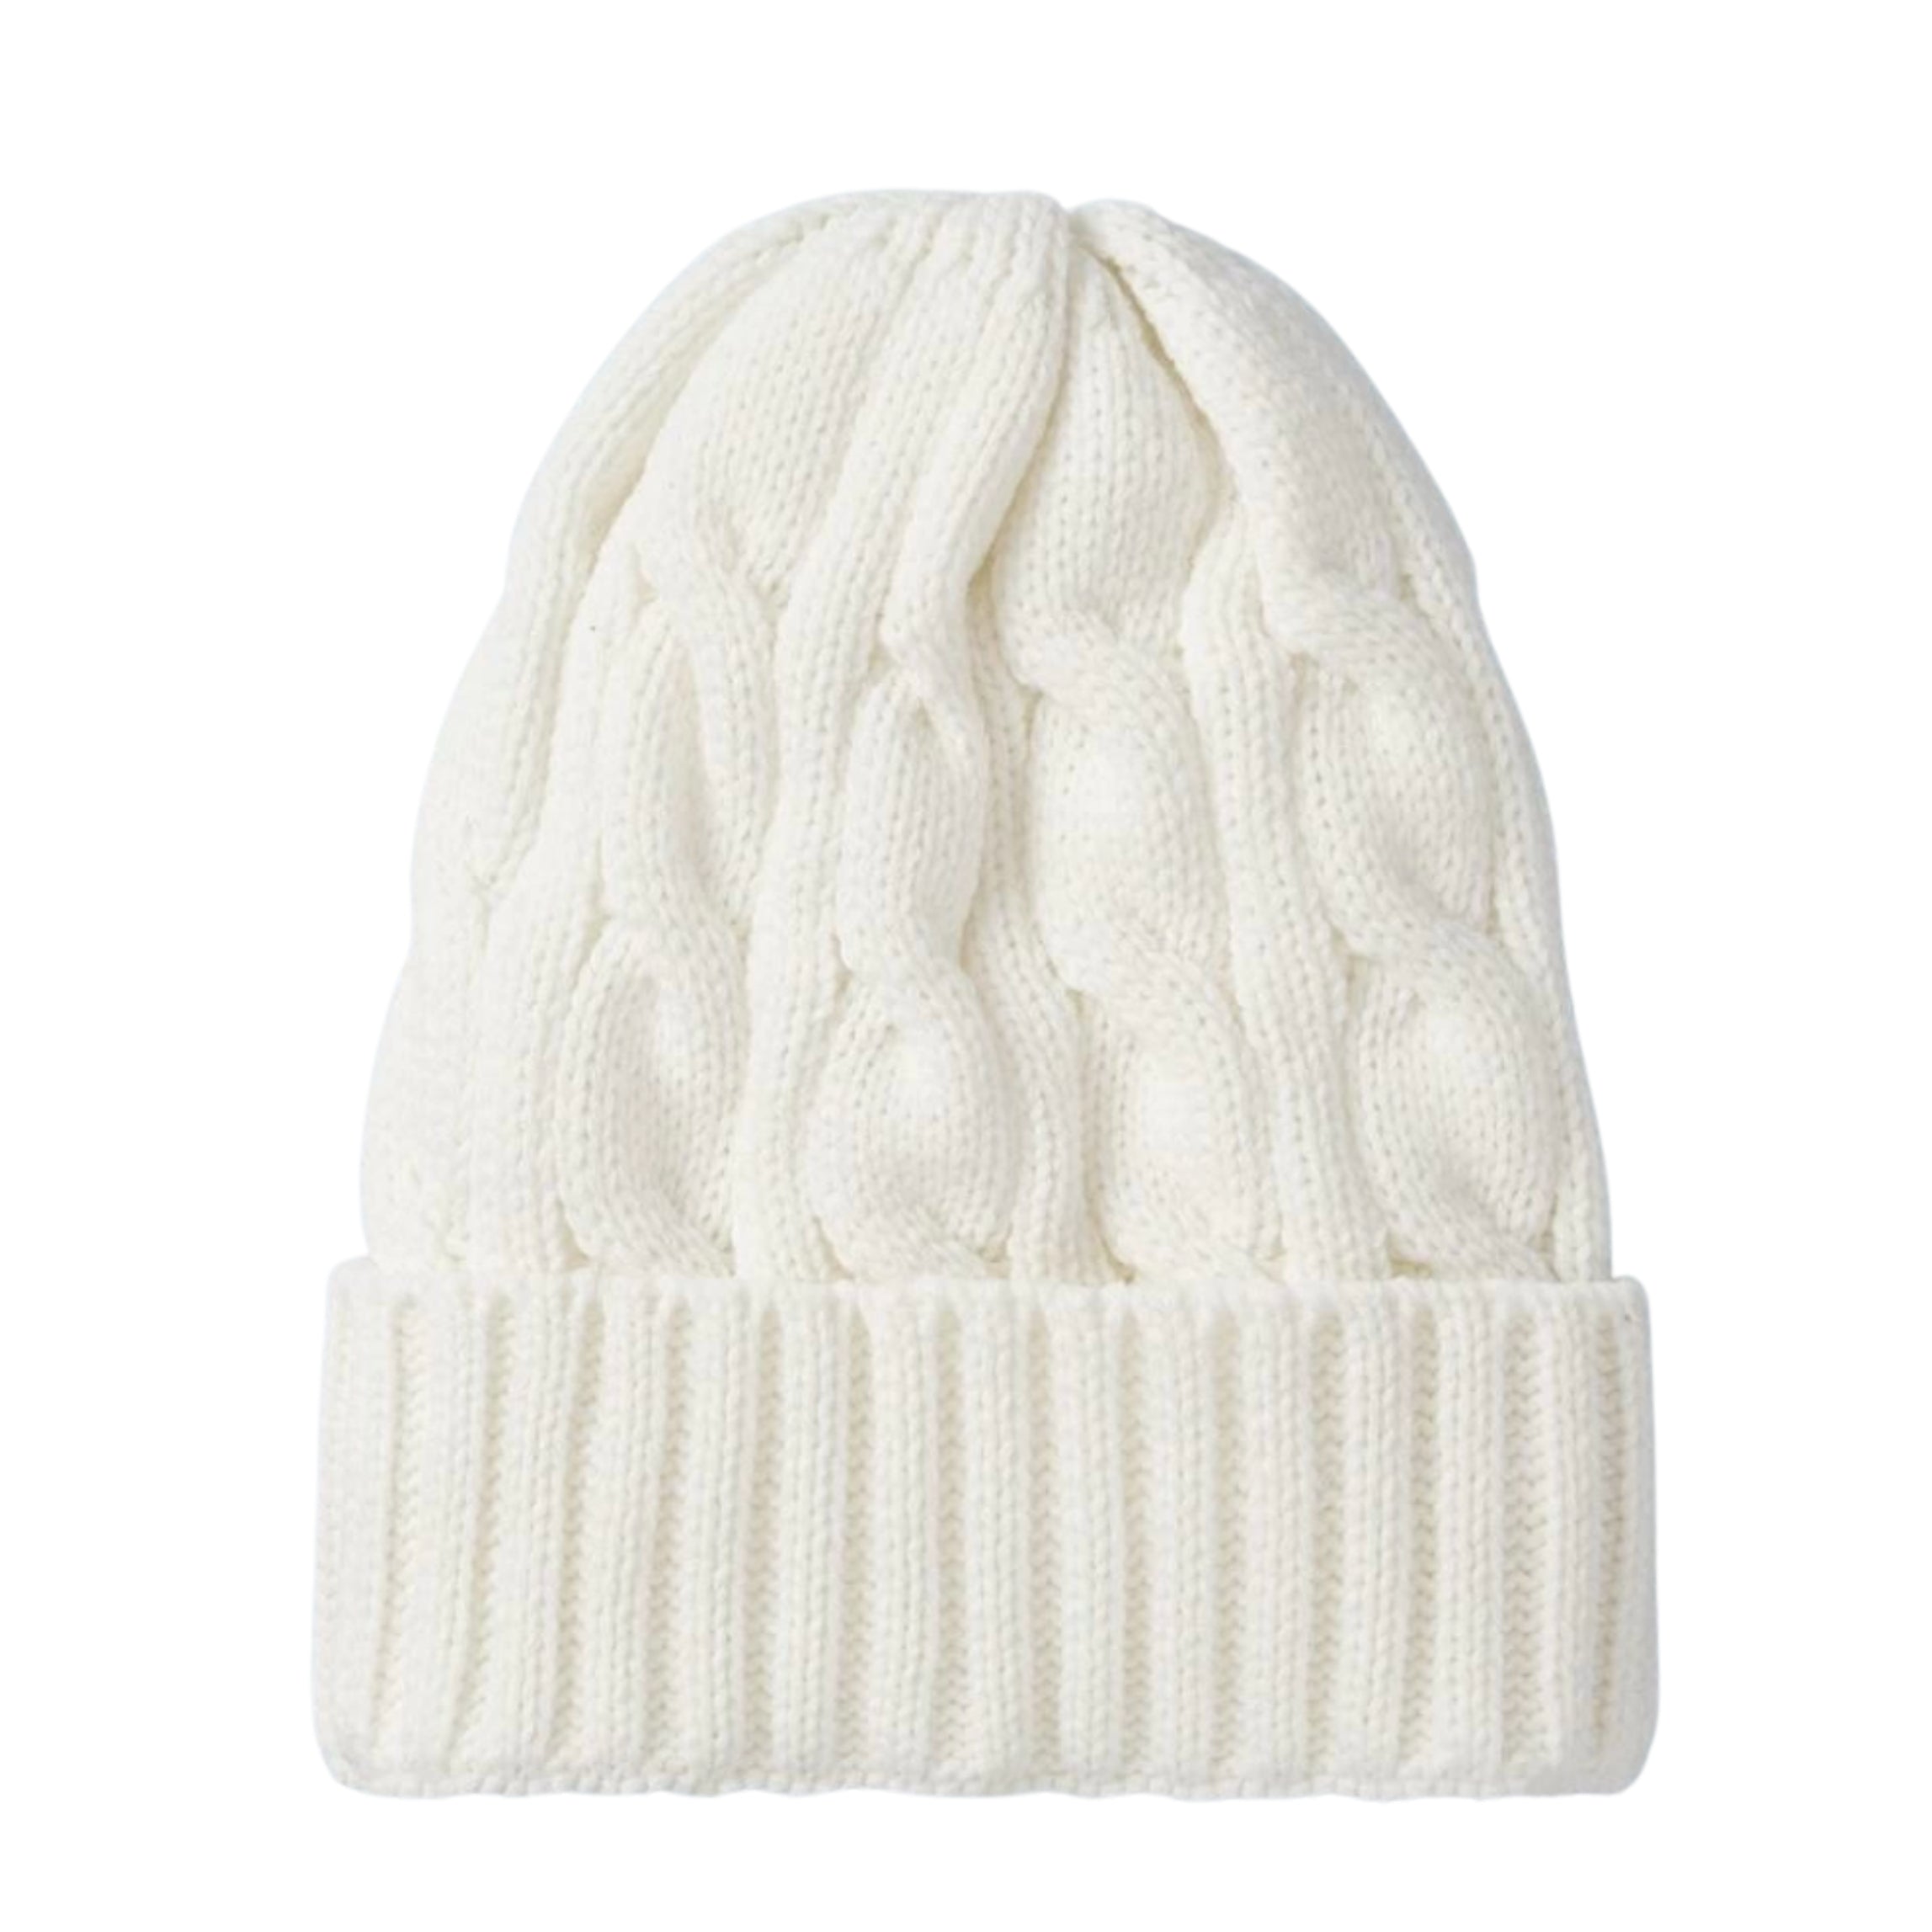 Fleece Lined Cable Knit Beanie